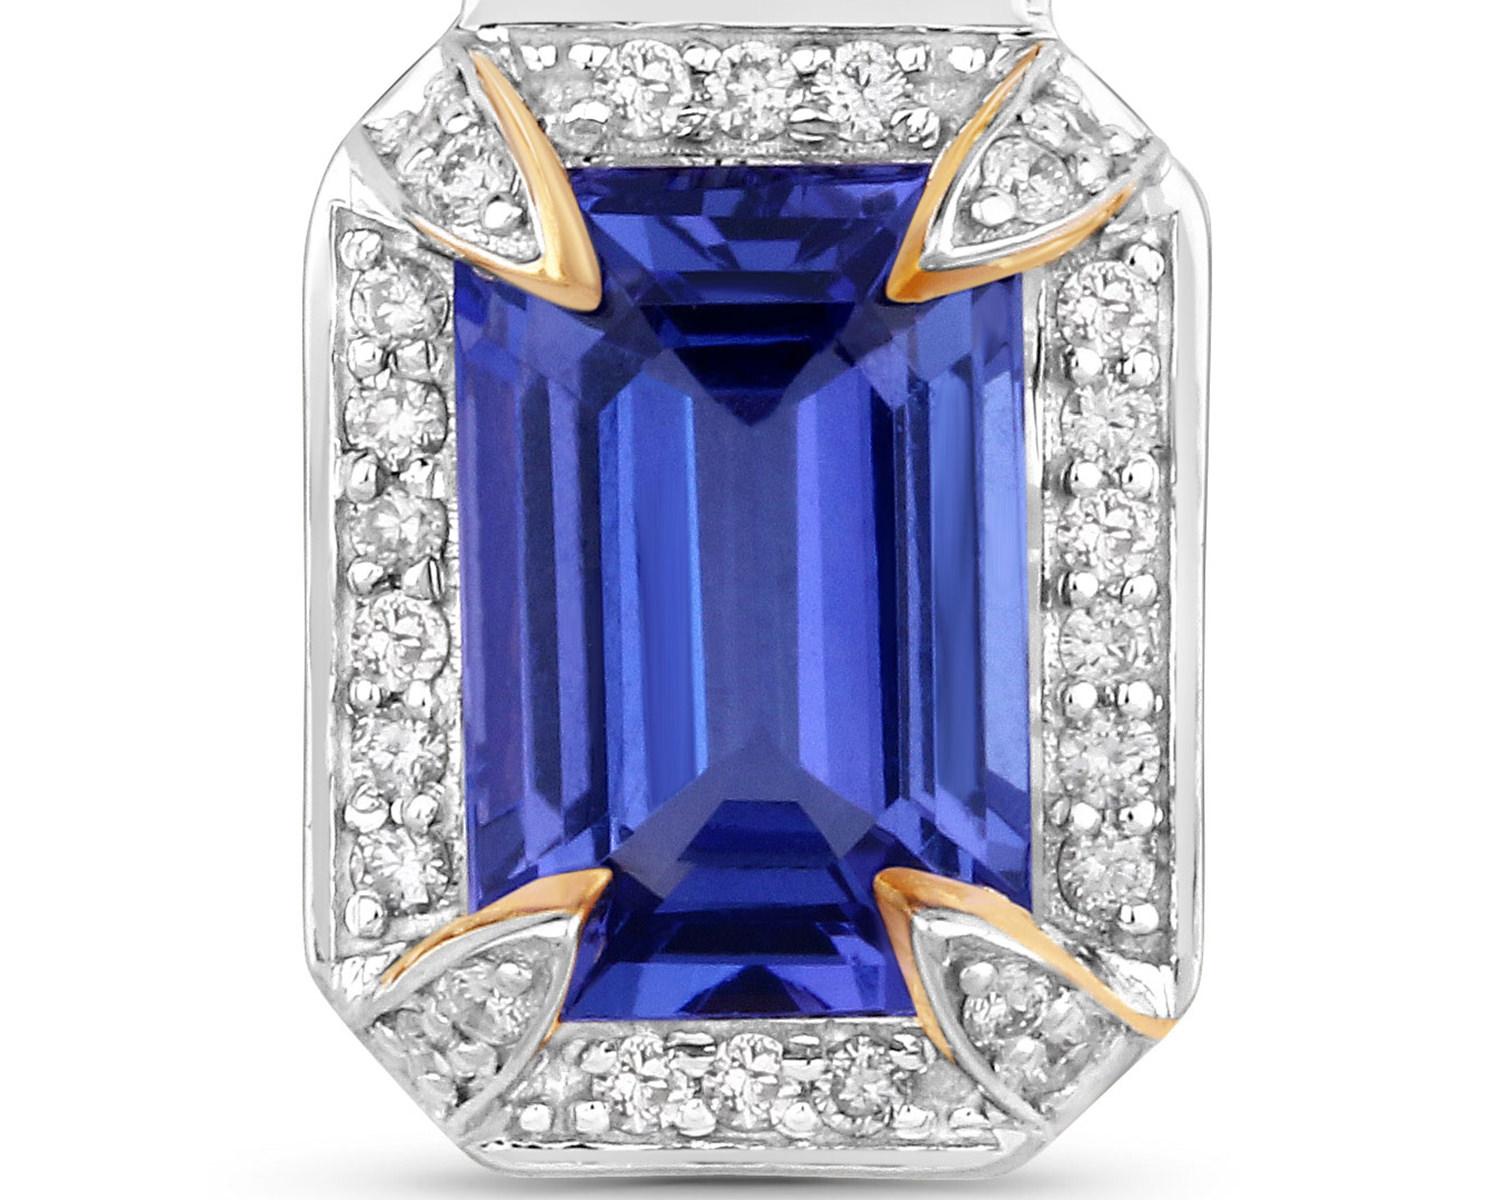 It comes with the appraisal by GIA GG/AJP
All Gemstones are Natural
Emerald Cut Tanzanite = 1.91 Carat
40 Round Diamonds = 0.17 Carats
Metal: 14K Gold